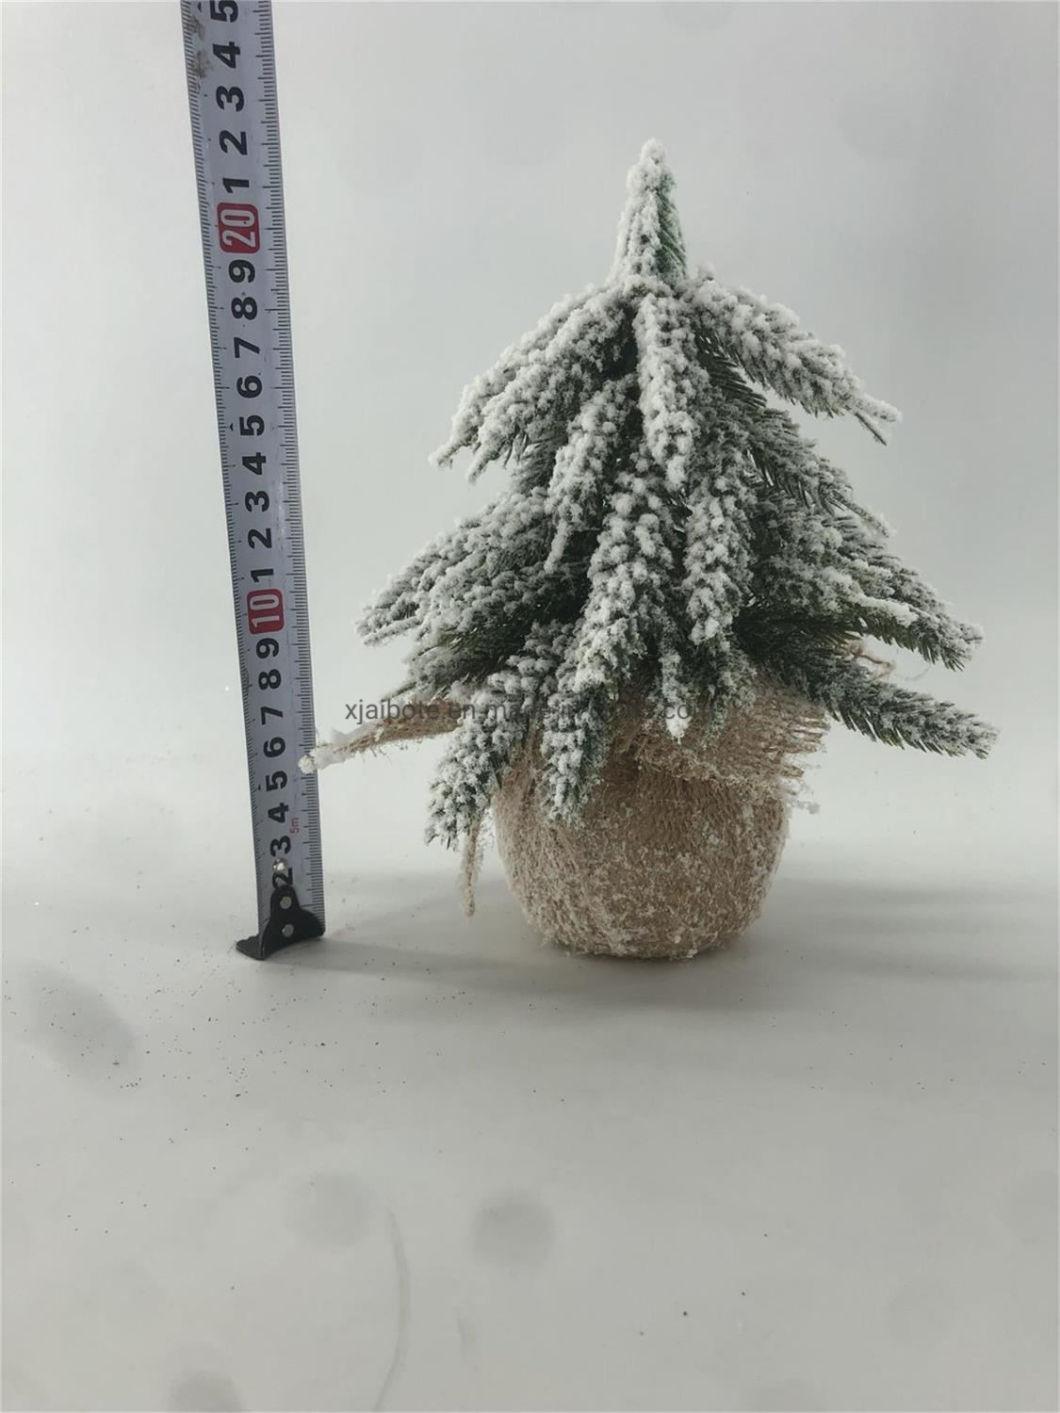 PE Artificial Christmas Tree for Decoration - Wooden Base with Hemp - Snow